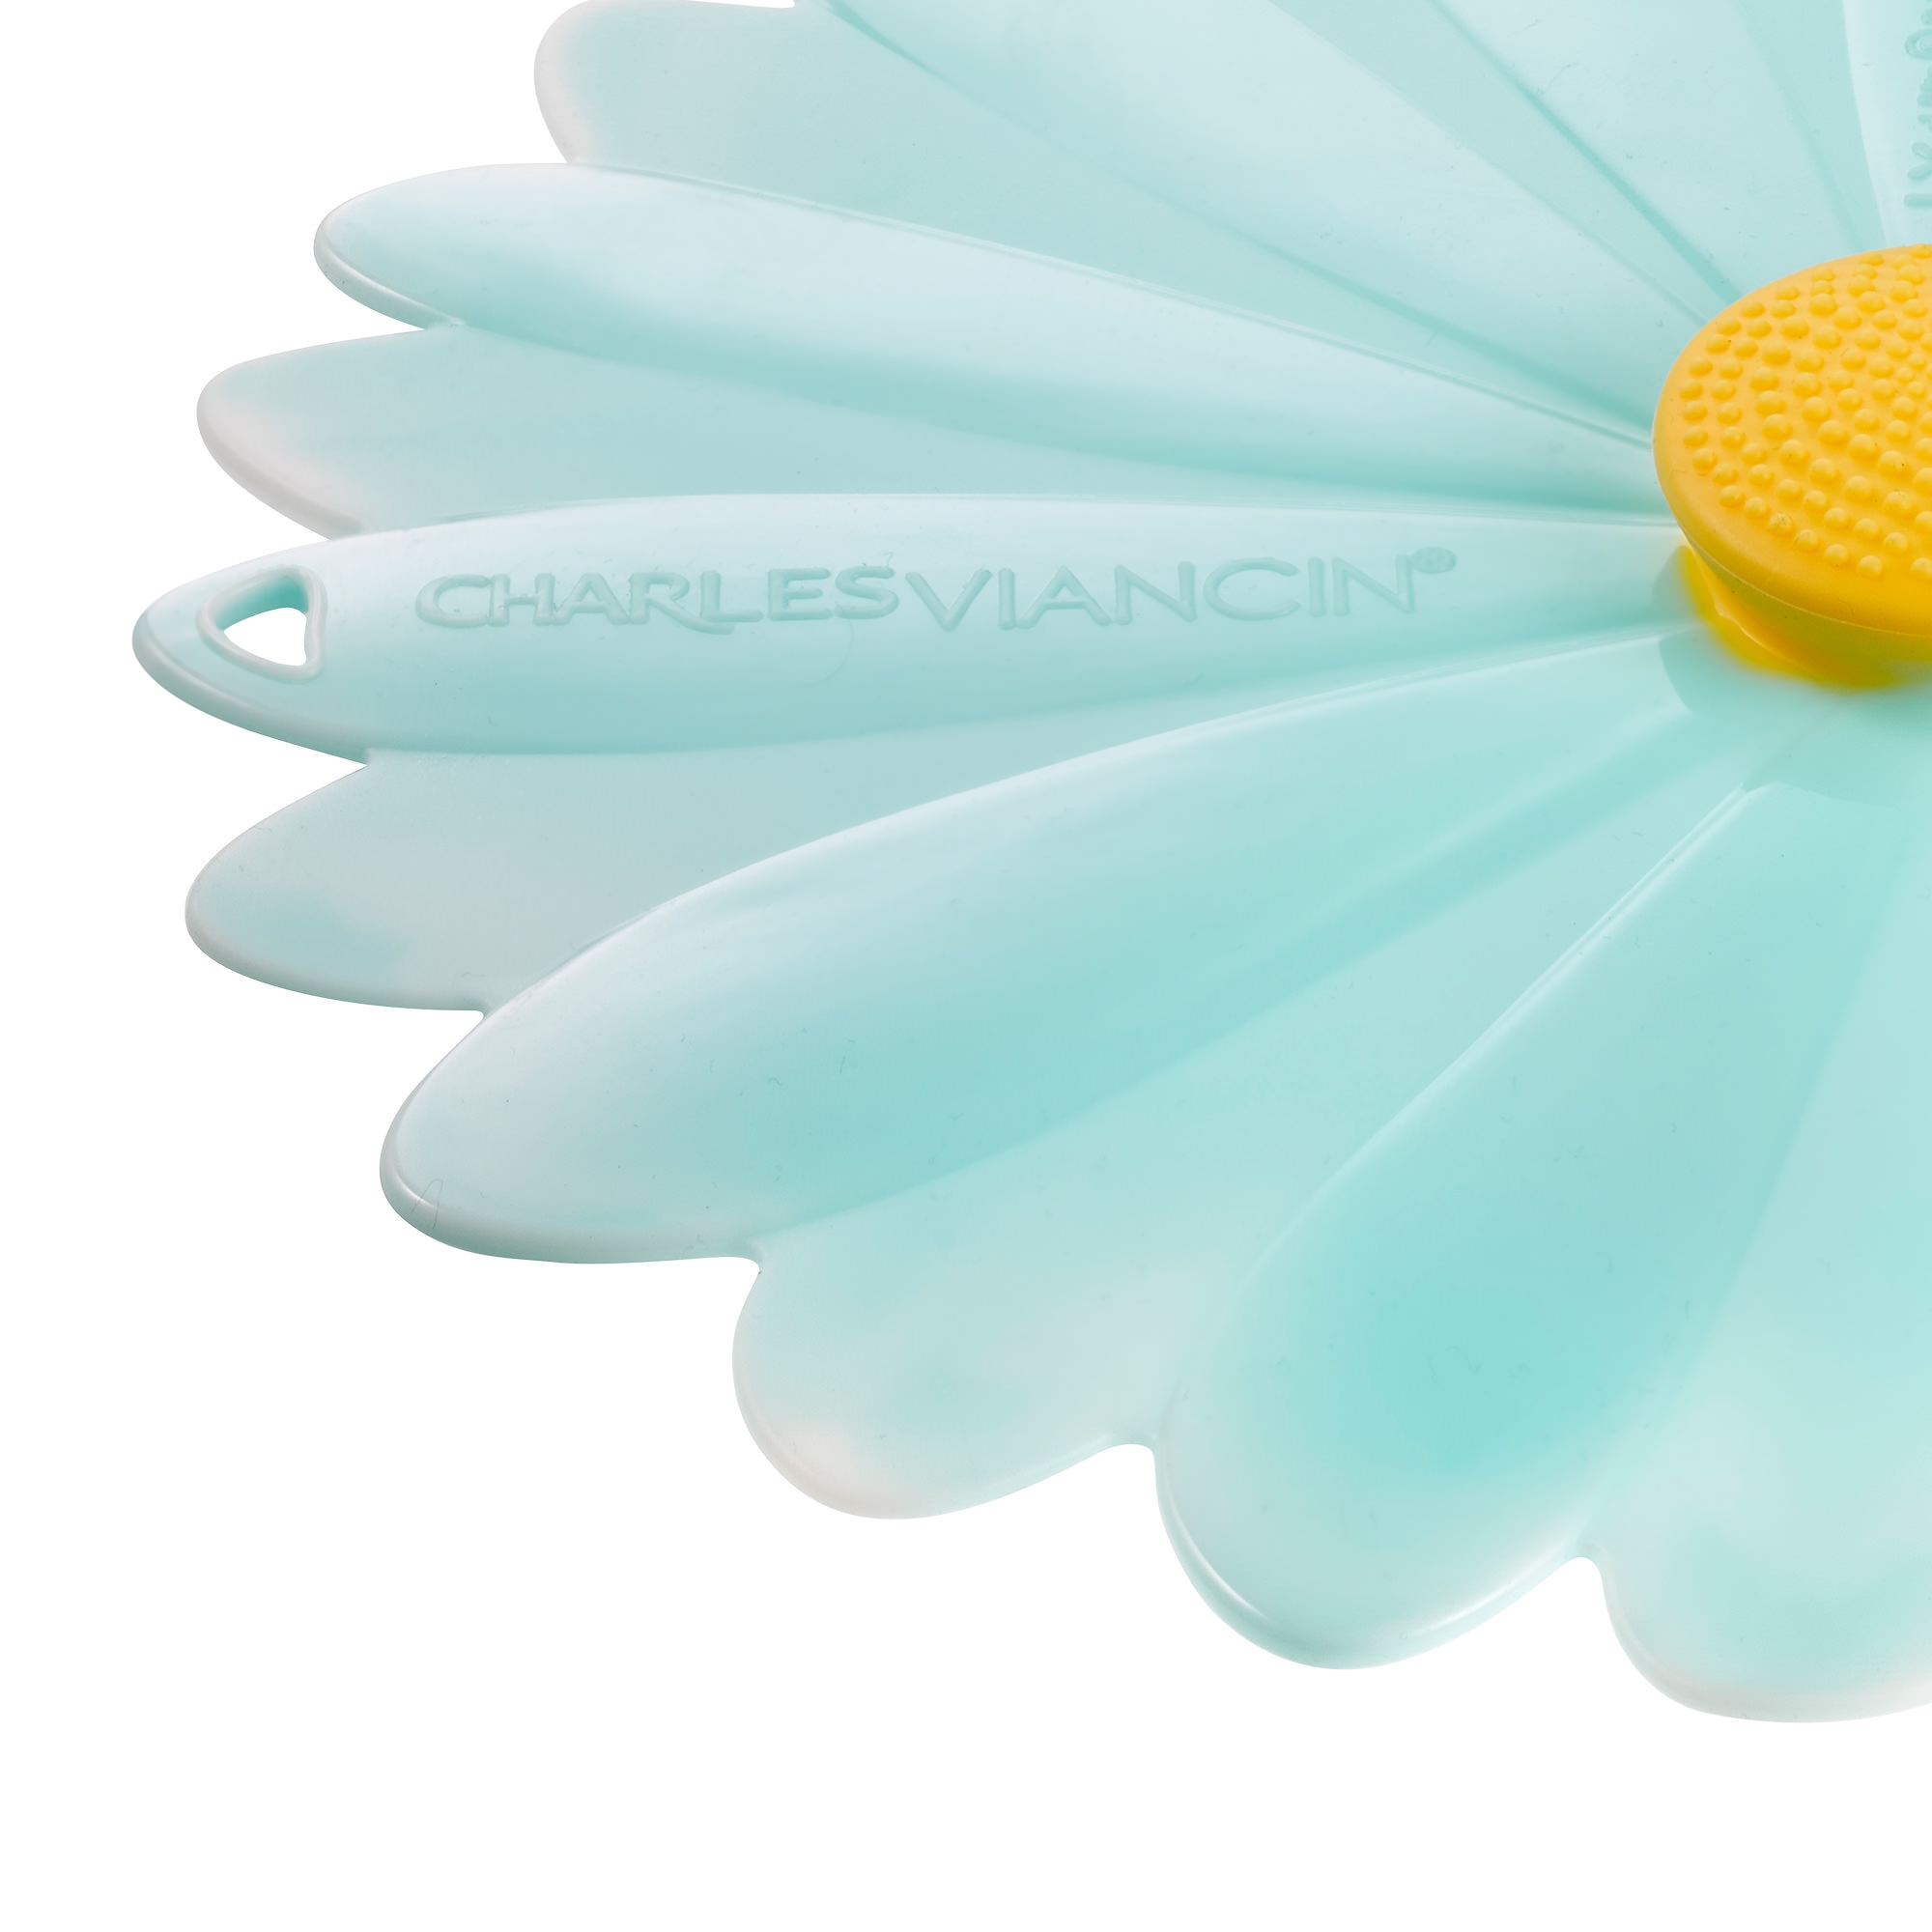 Charles Viancin Daisy Silicone Lid 28cm Blue Image 2